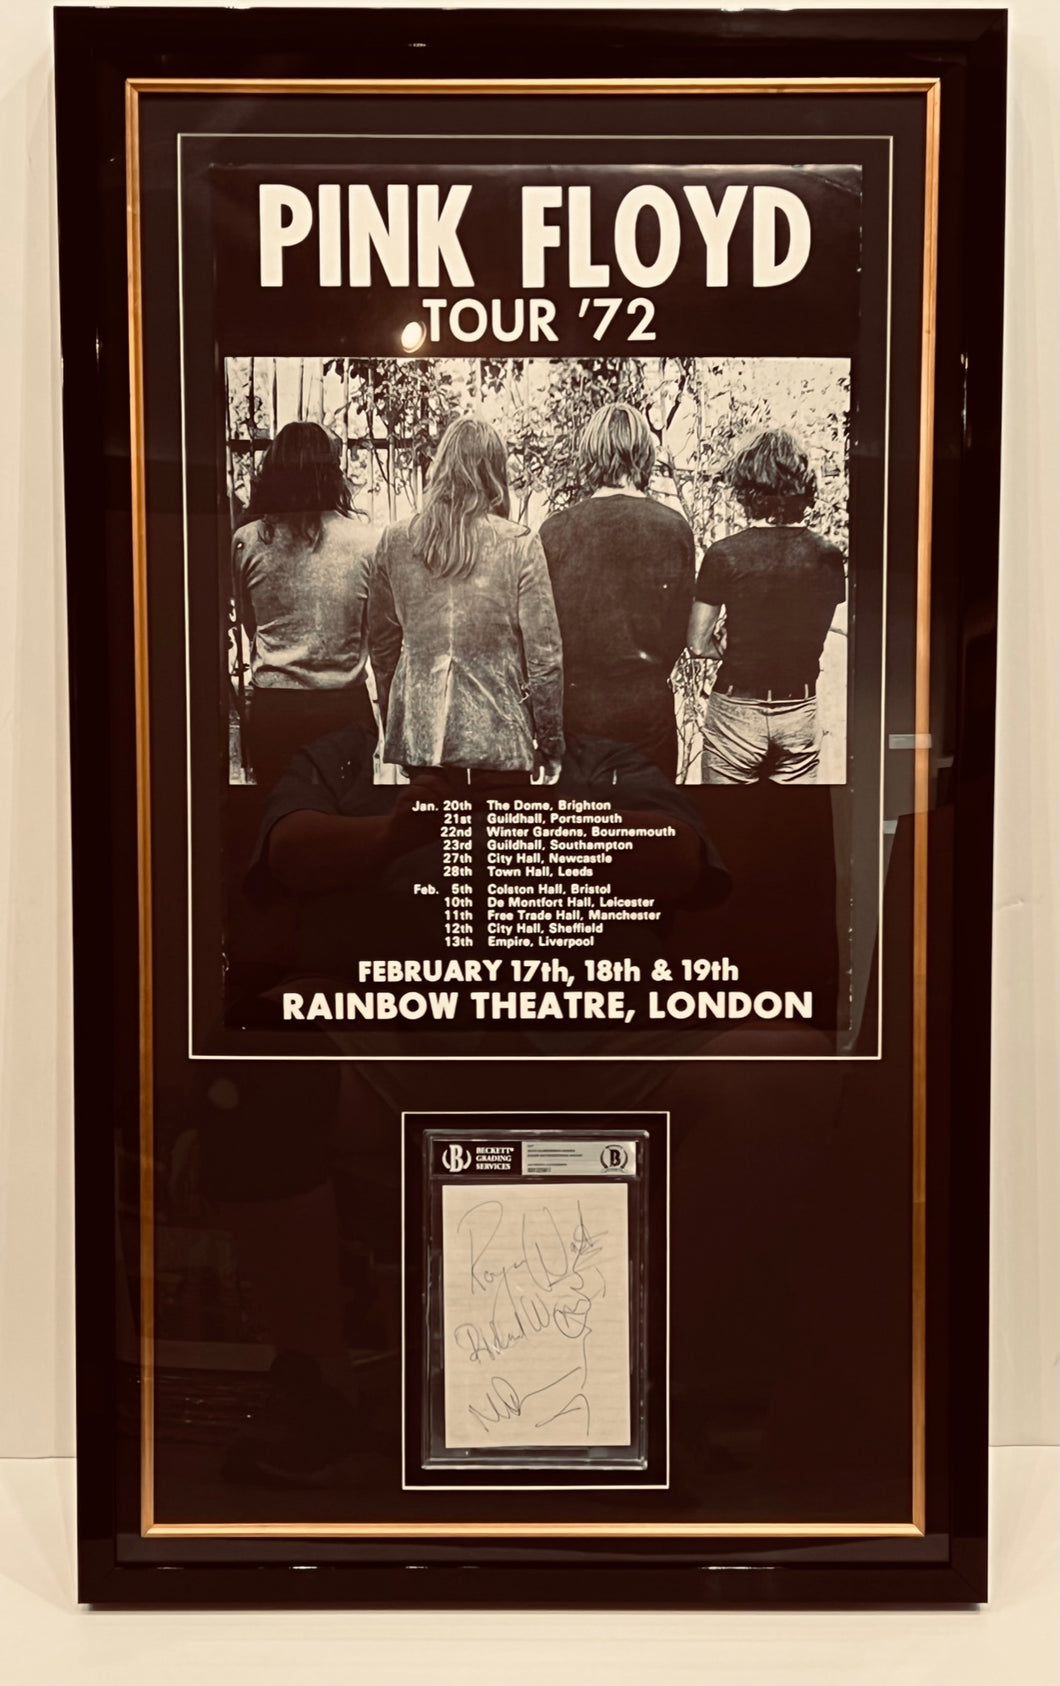 PINK FLOYD - RARE RAINBOW THEATRE POSTER WITH PINK FLOYD HAND-SIGNED PAGE